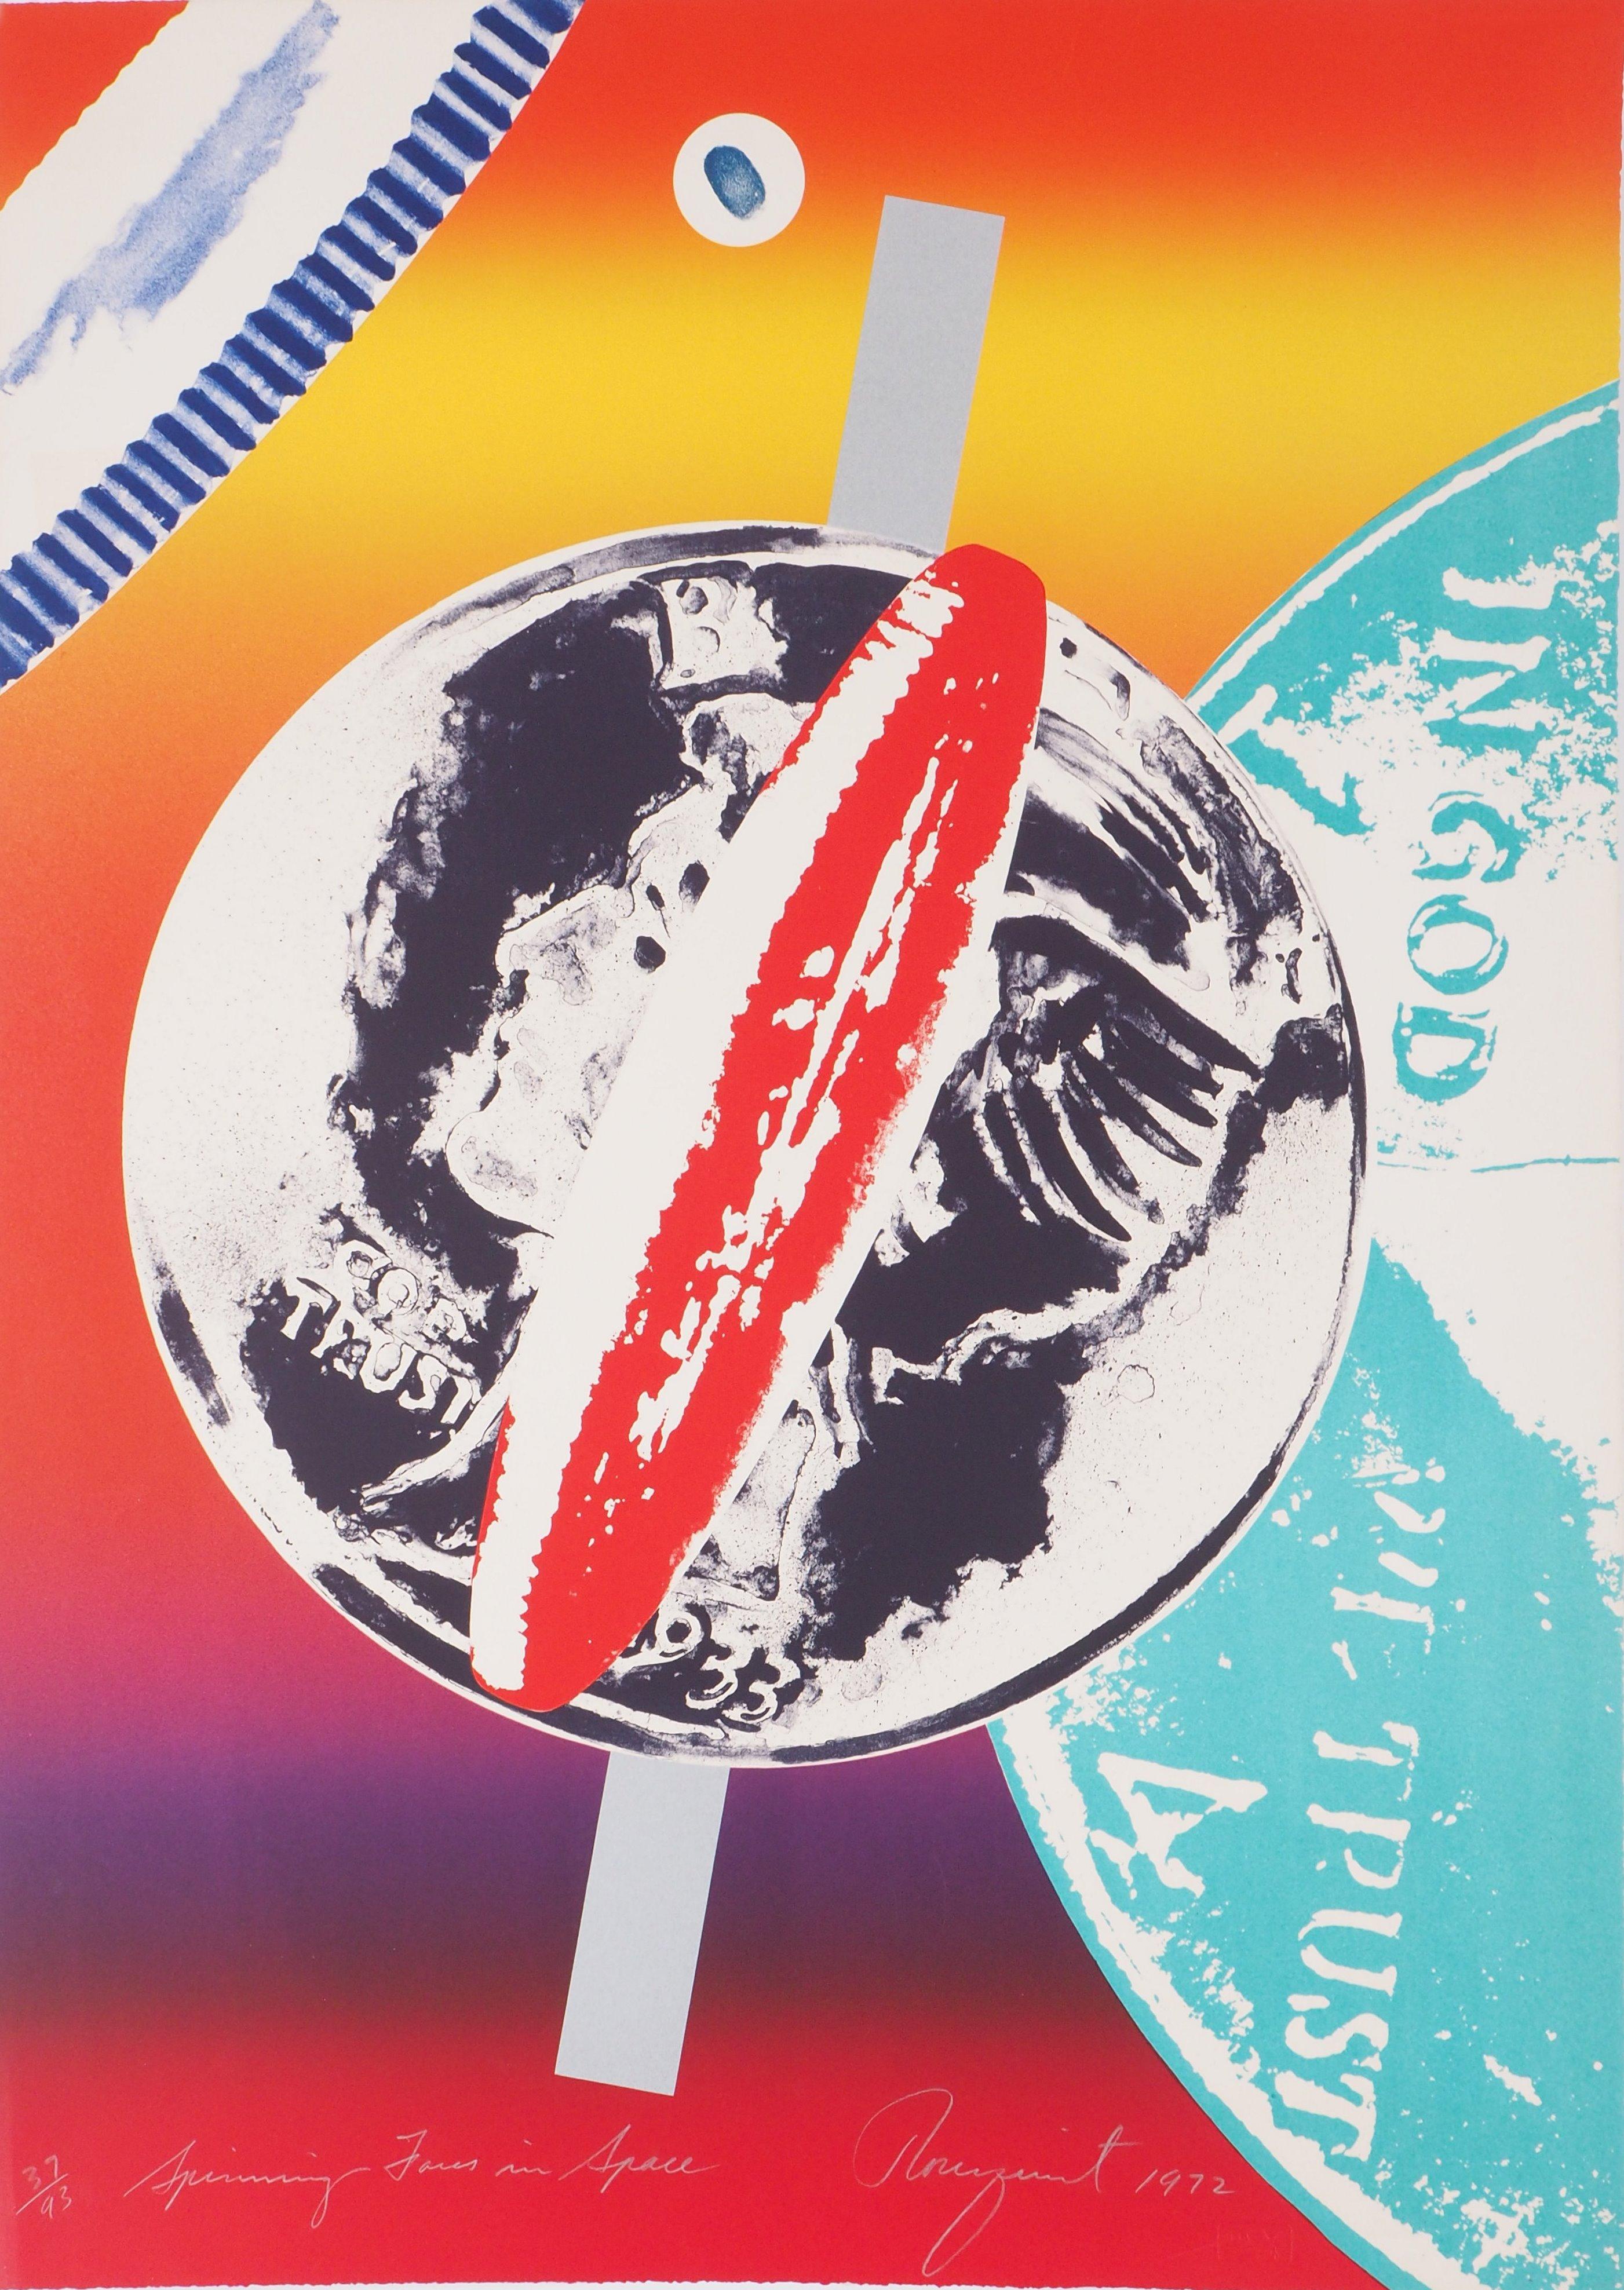 James Rosenquist Abstract Print - Spinning Faces in Space - Original Handsigned Screen Print (93 copies)